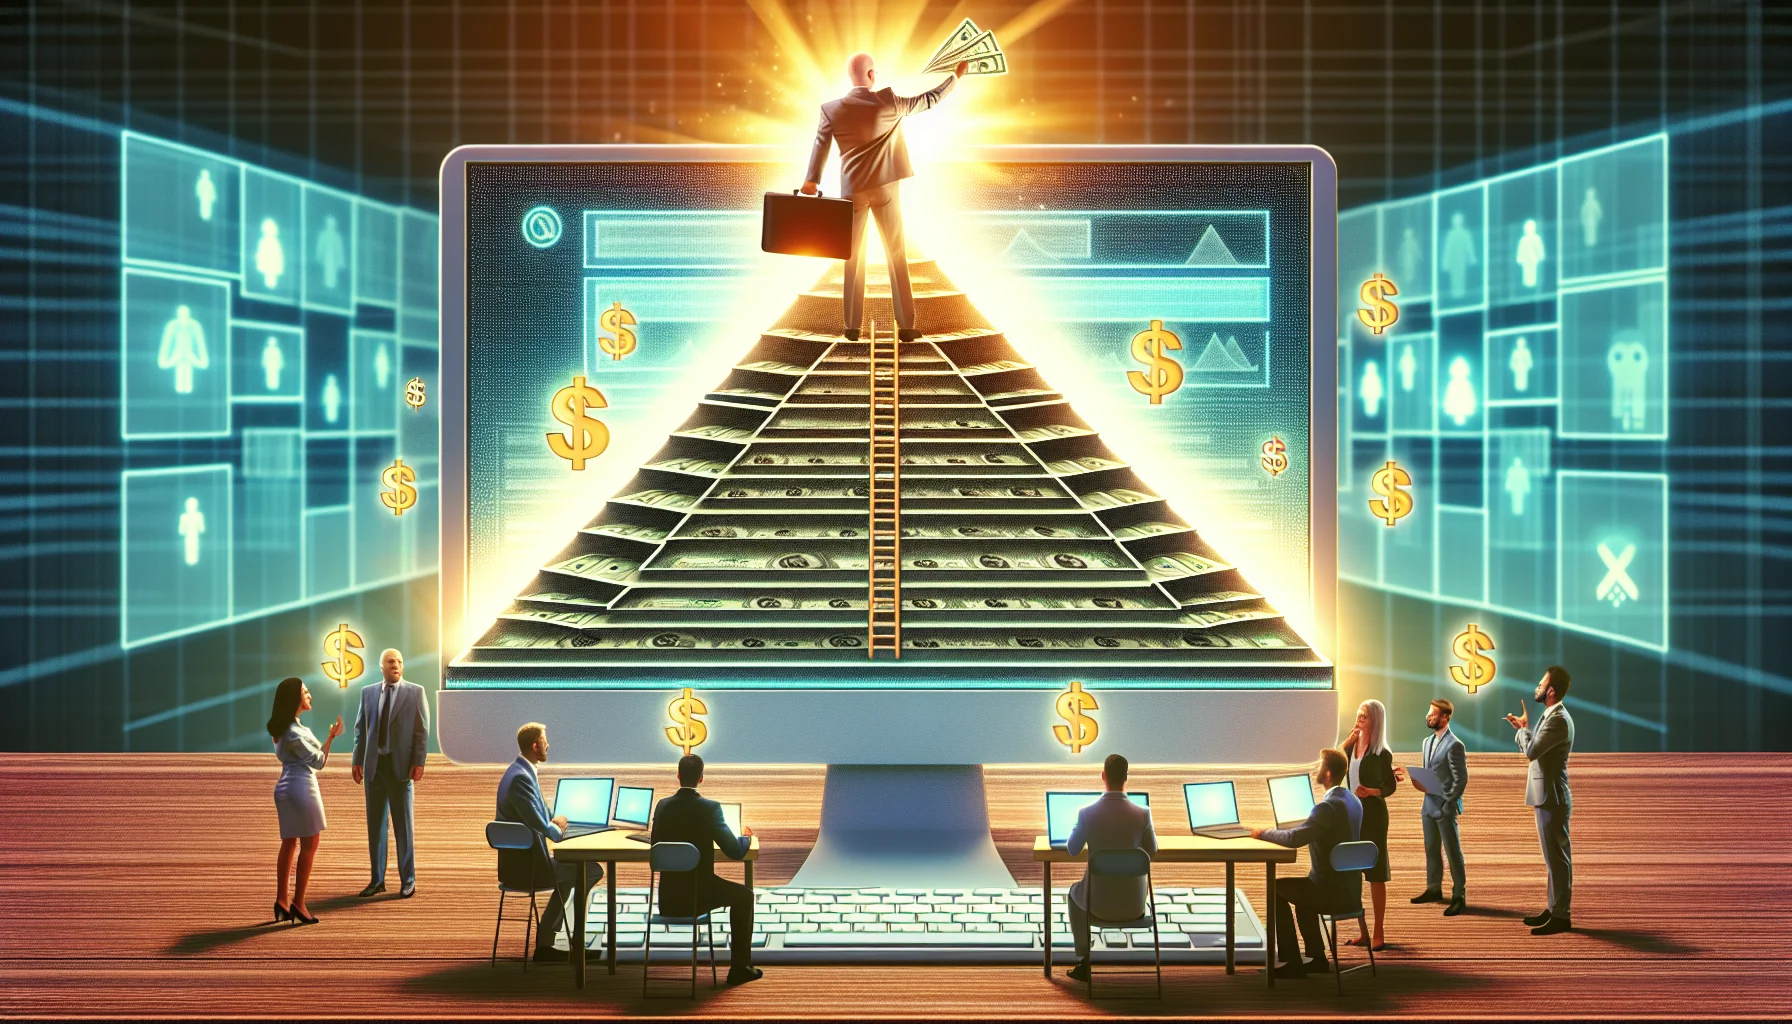 Create a humorous, realistic image that captures the concept of an affiliate marketing pyramid scheme related to making money online. The image might feature a computer screen displaying a pyramid-shaped chart with layers of people, representing different affiliate levels. On top of the pyramid let's place a figure holding a glowing briefcase full of internet symbols like '@' and 'hashtag'. Dollar signs might float around the scene, indicating the allure of easy money. However, also include a few people at the bottom of the pyramid looking puzzled or overwhelmed, to show the trickiness of such schemes.